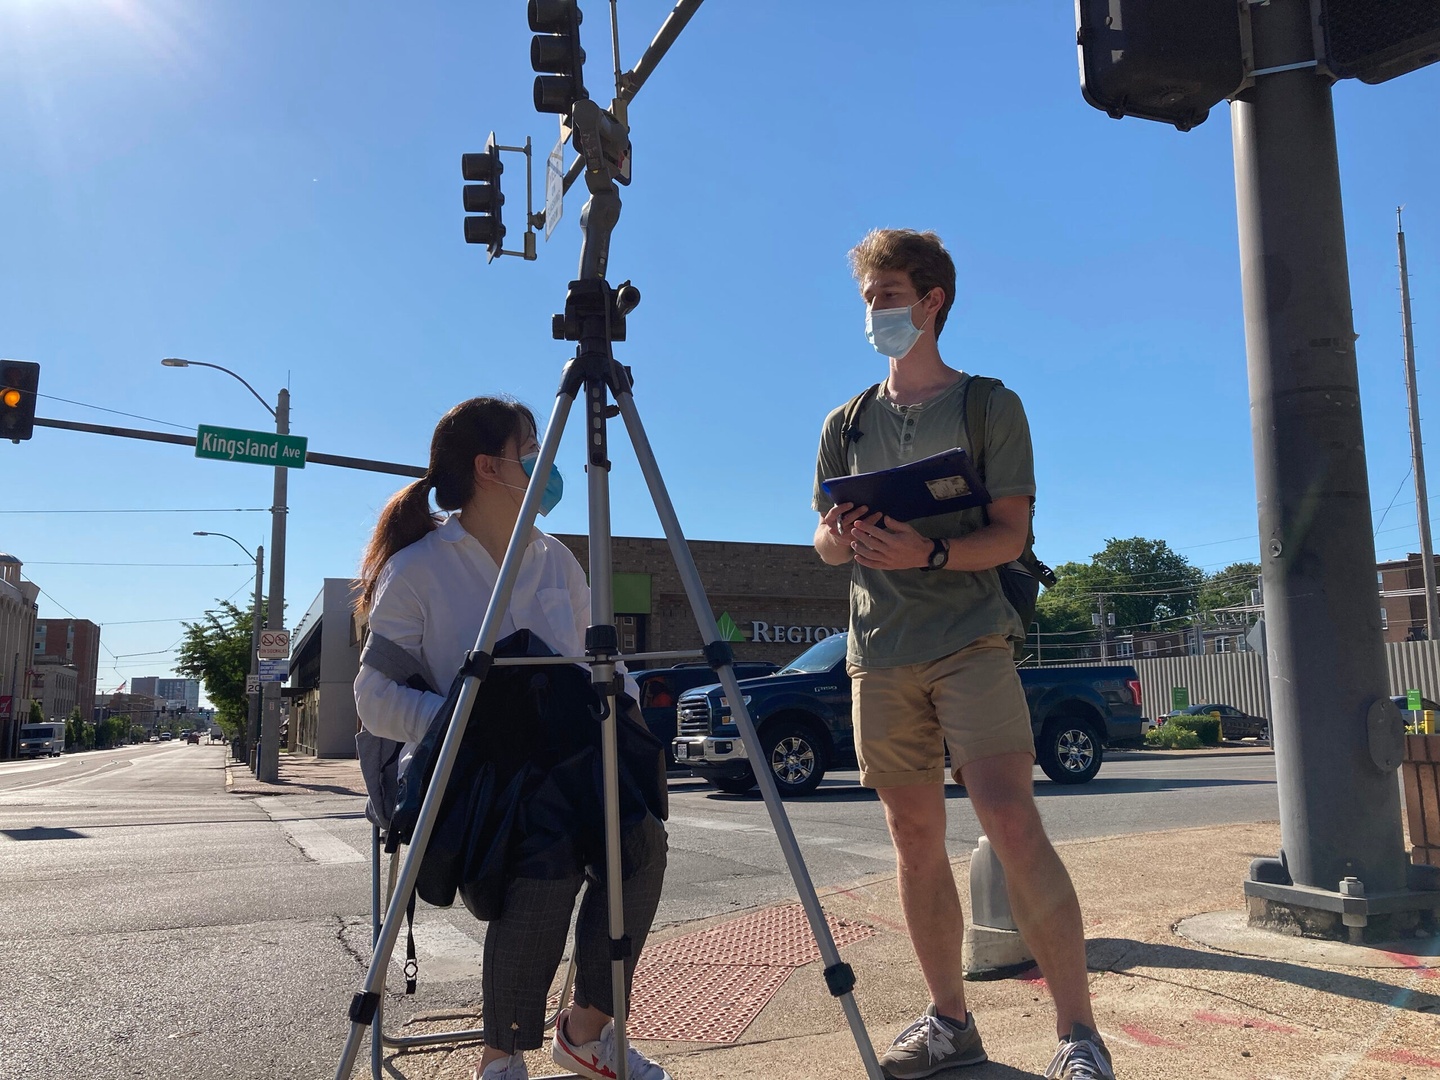 Two students at the intersection of streets, with a street sign for Kingland on a stoplight overhead. One student, seated behind a tripod, is speaking to the other student who is standing. Both are wearing face masks.